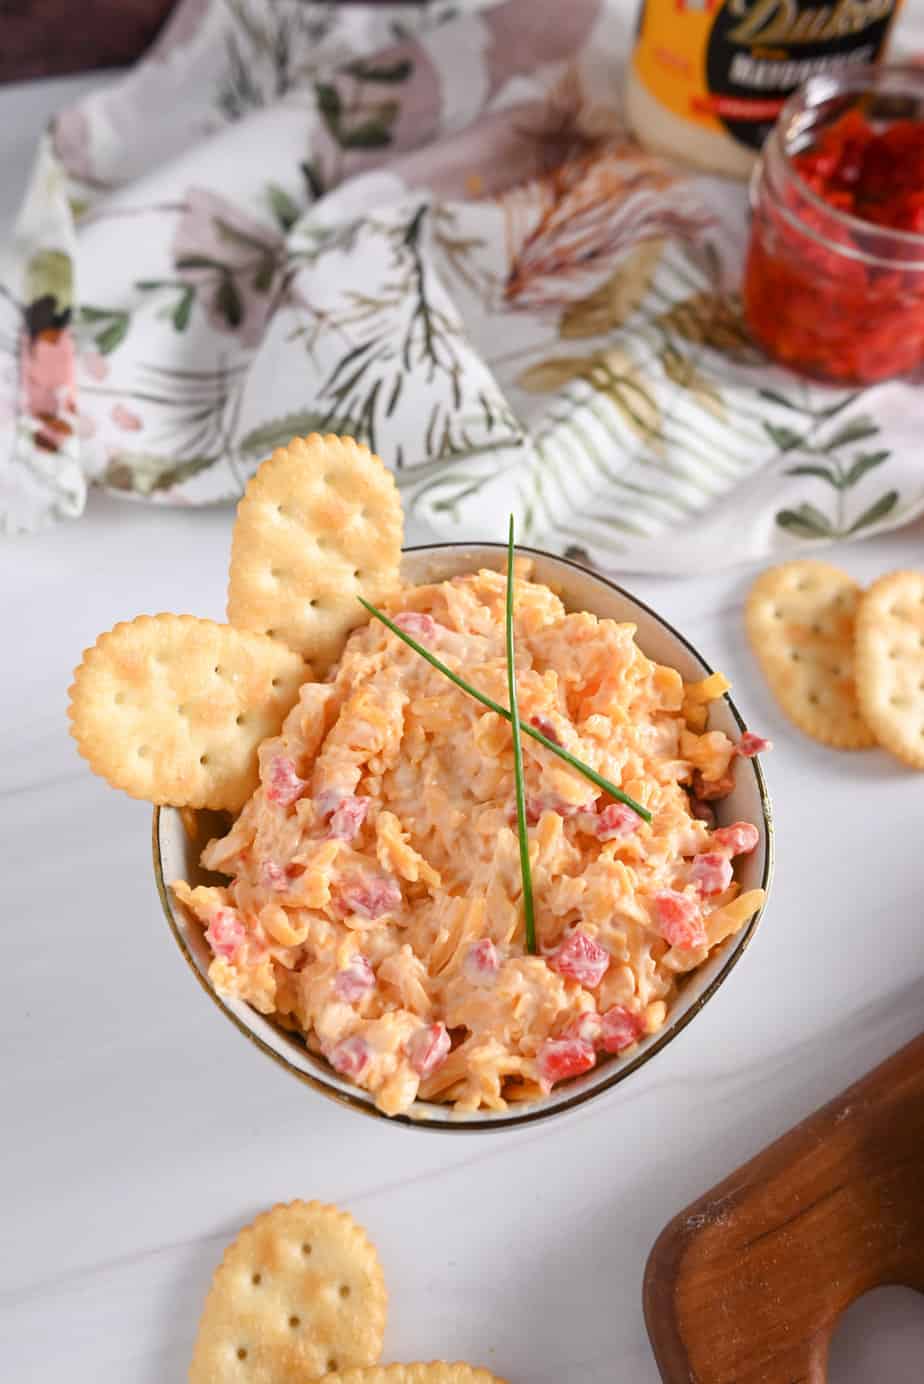 Overhead view of a white bowl filled with pimento cheese and garnished with chives and crackers.